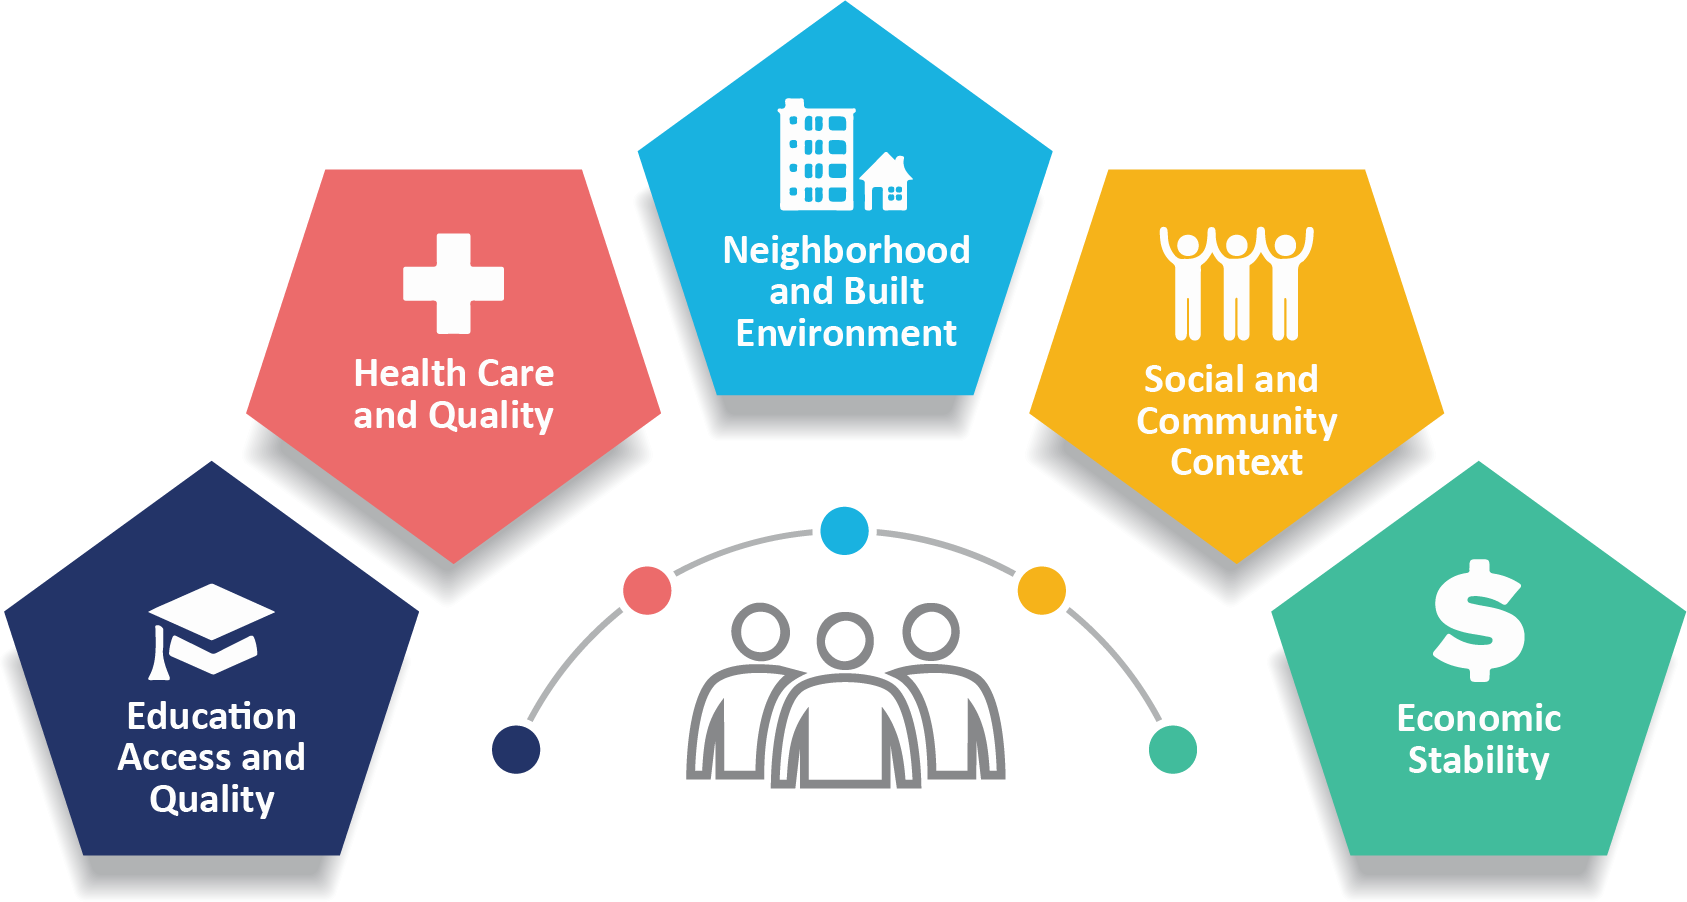 Half circular graphic with labels Education Access and Quality, Health Care and Quality, Neighborhood and Built Environment, Social and Community Context, and Economic Stability around 3 icons of people. 